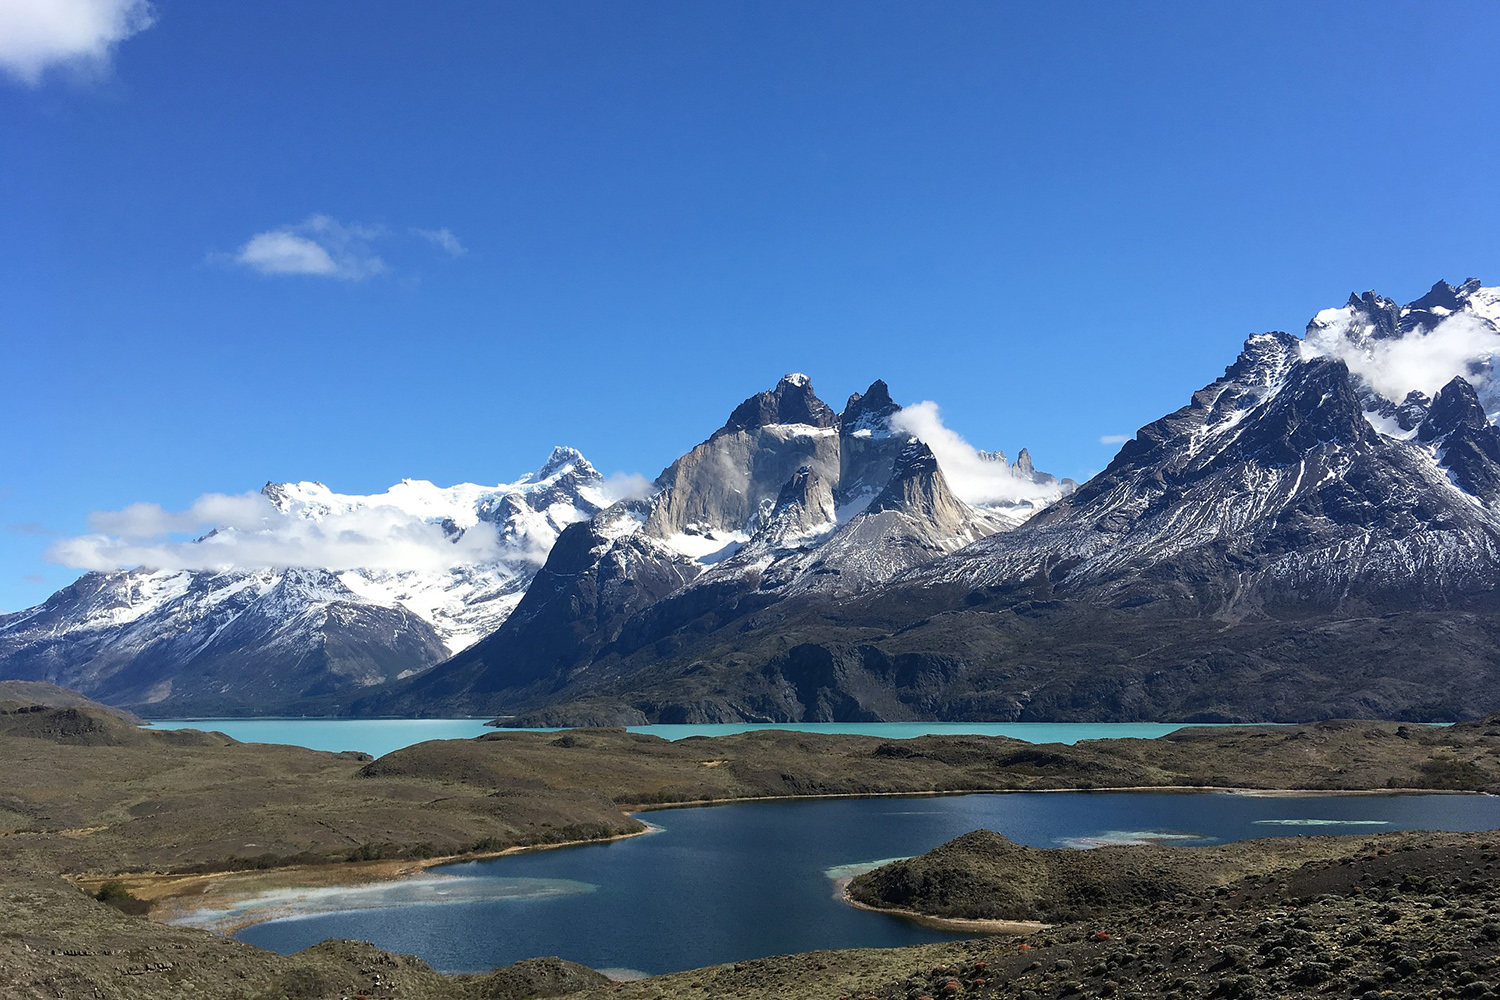 Chile to open its borders to foreign tourists on November 1. Travel Restrictions Update